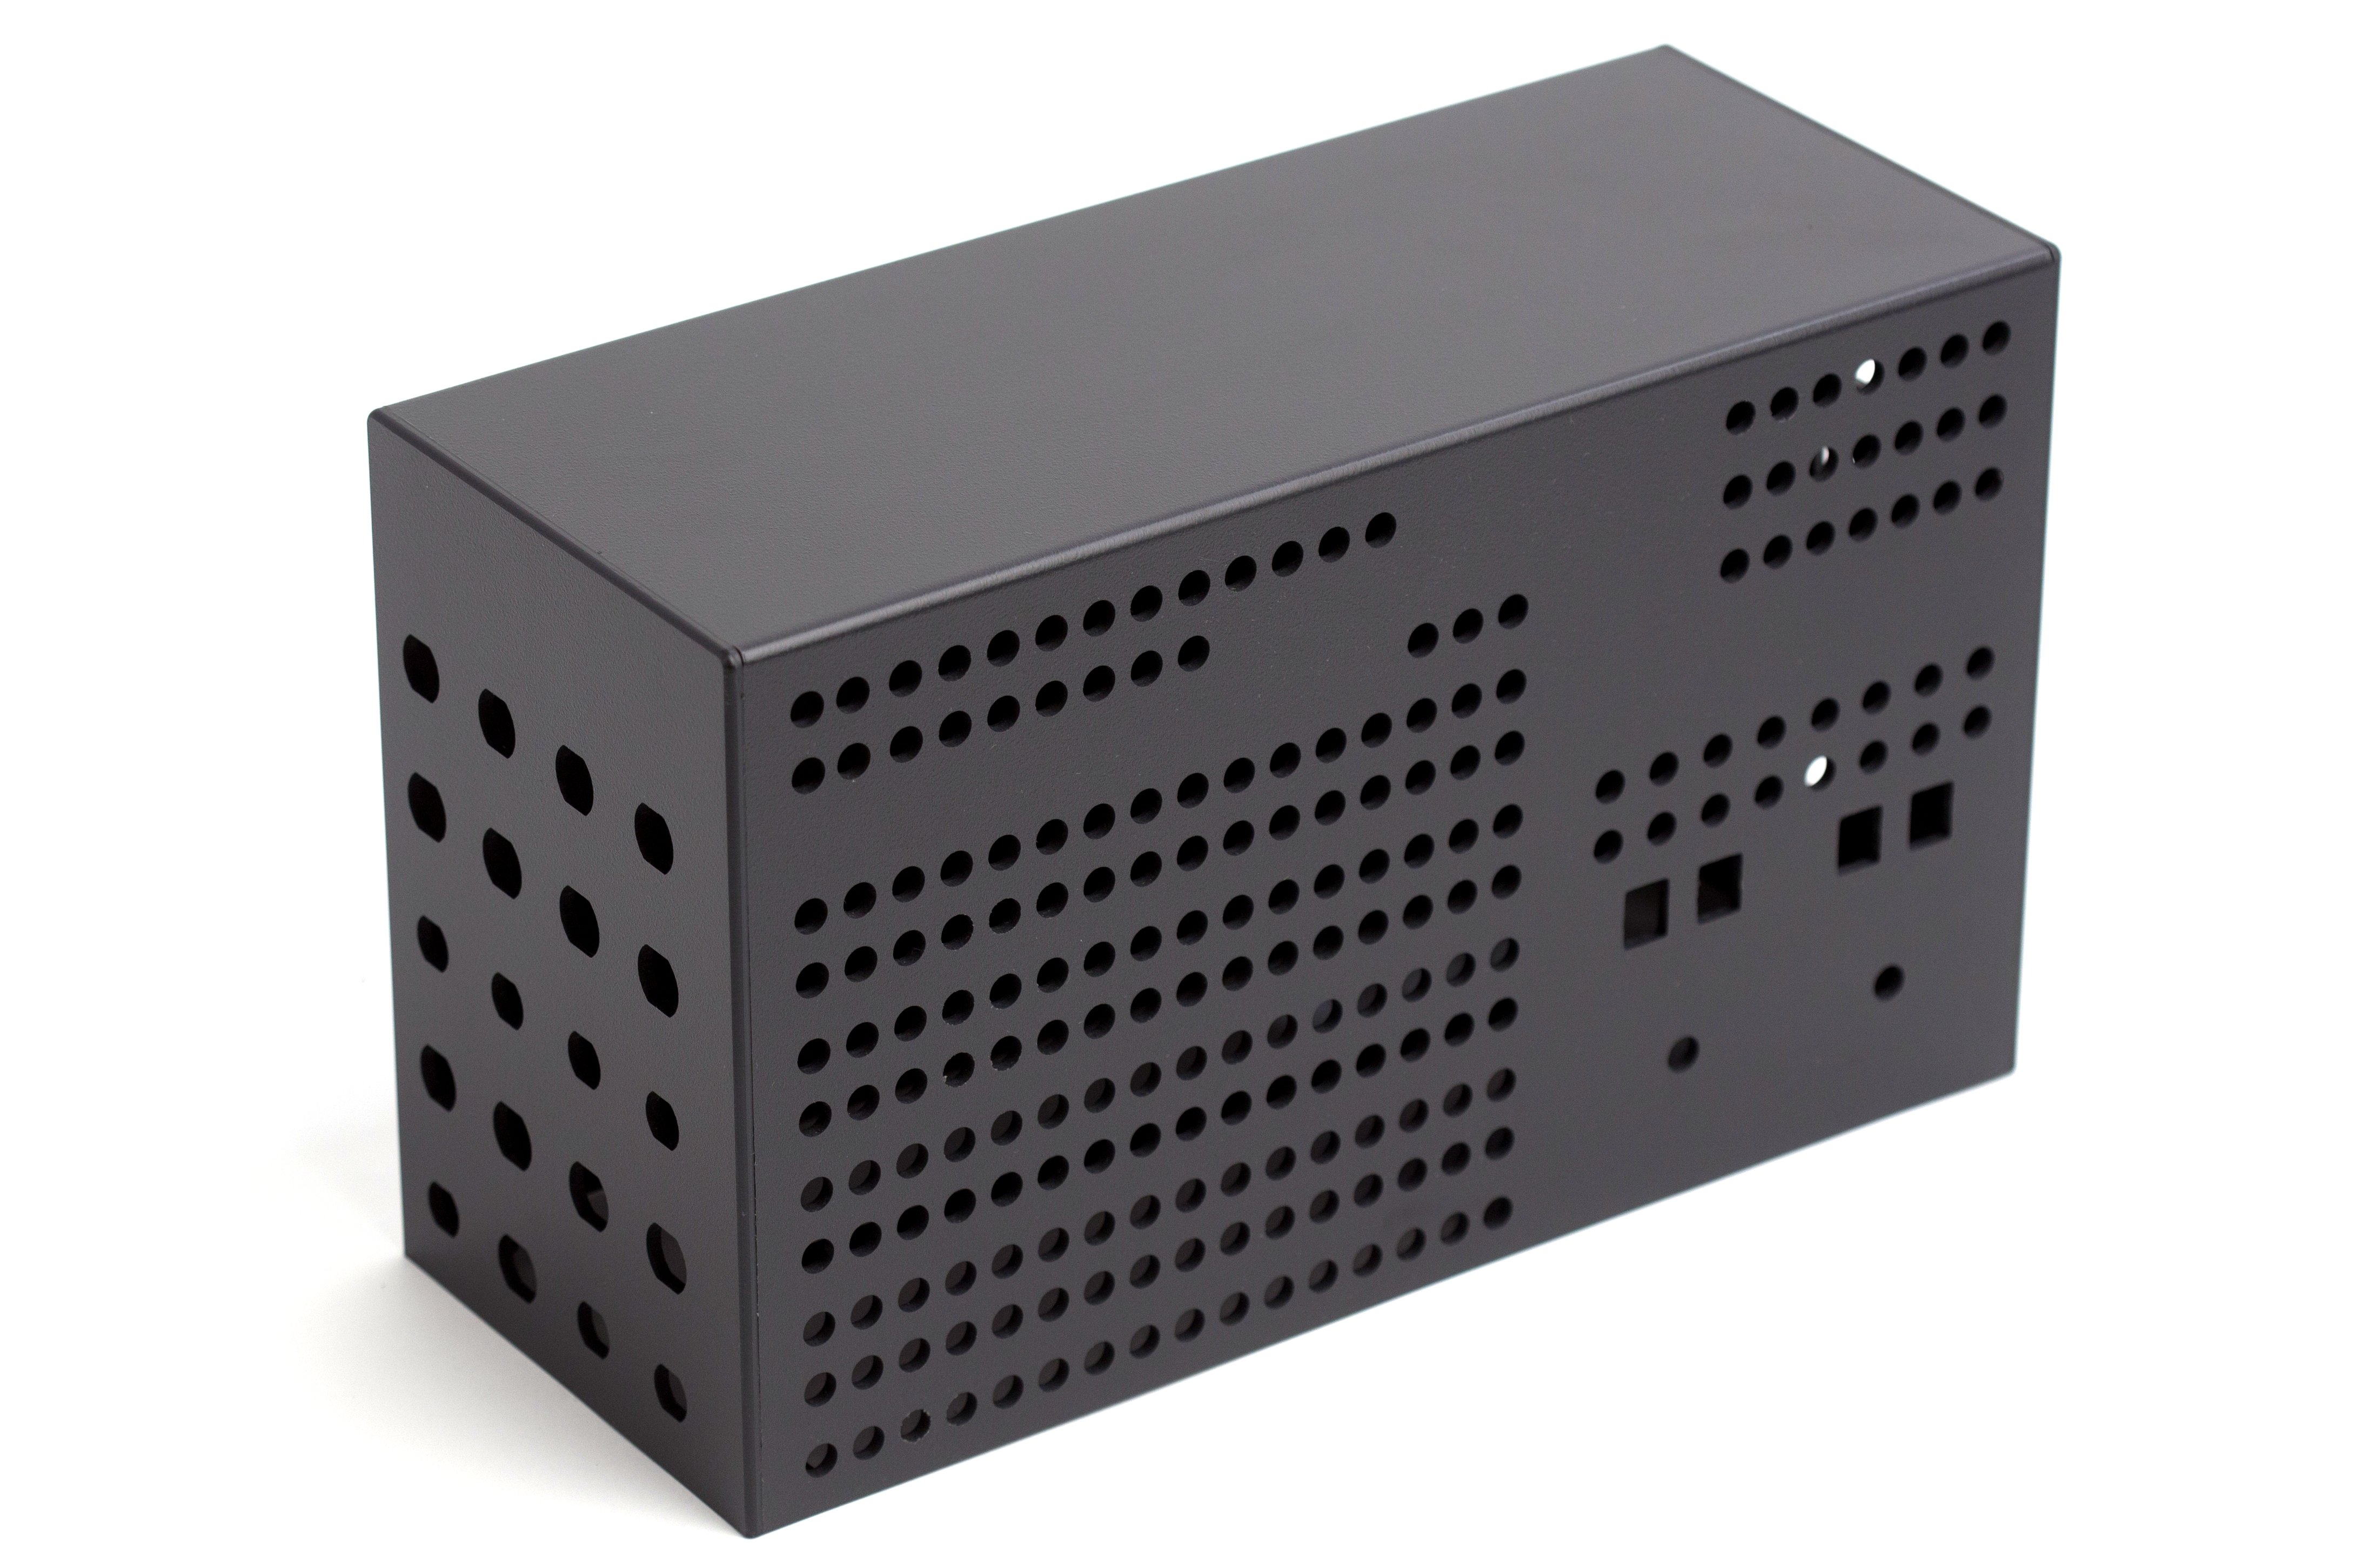 Black Plastic Enclosure with numerous vents on each side